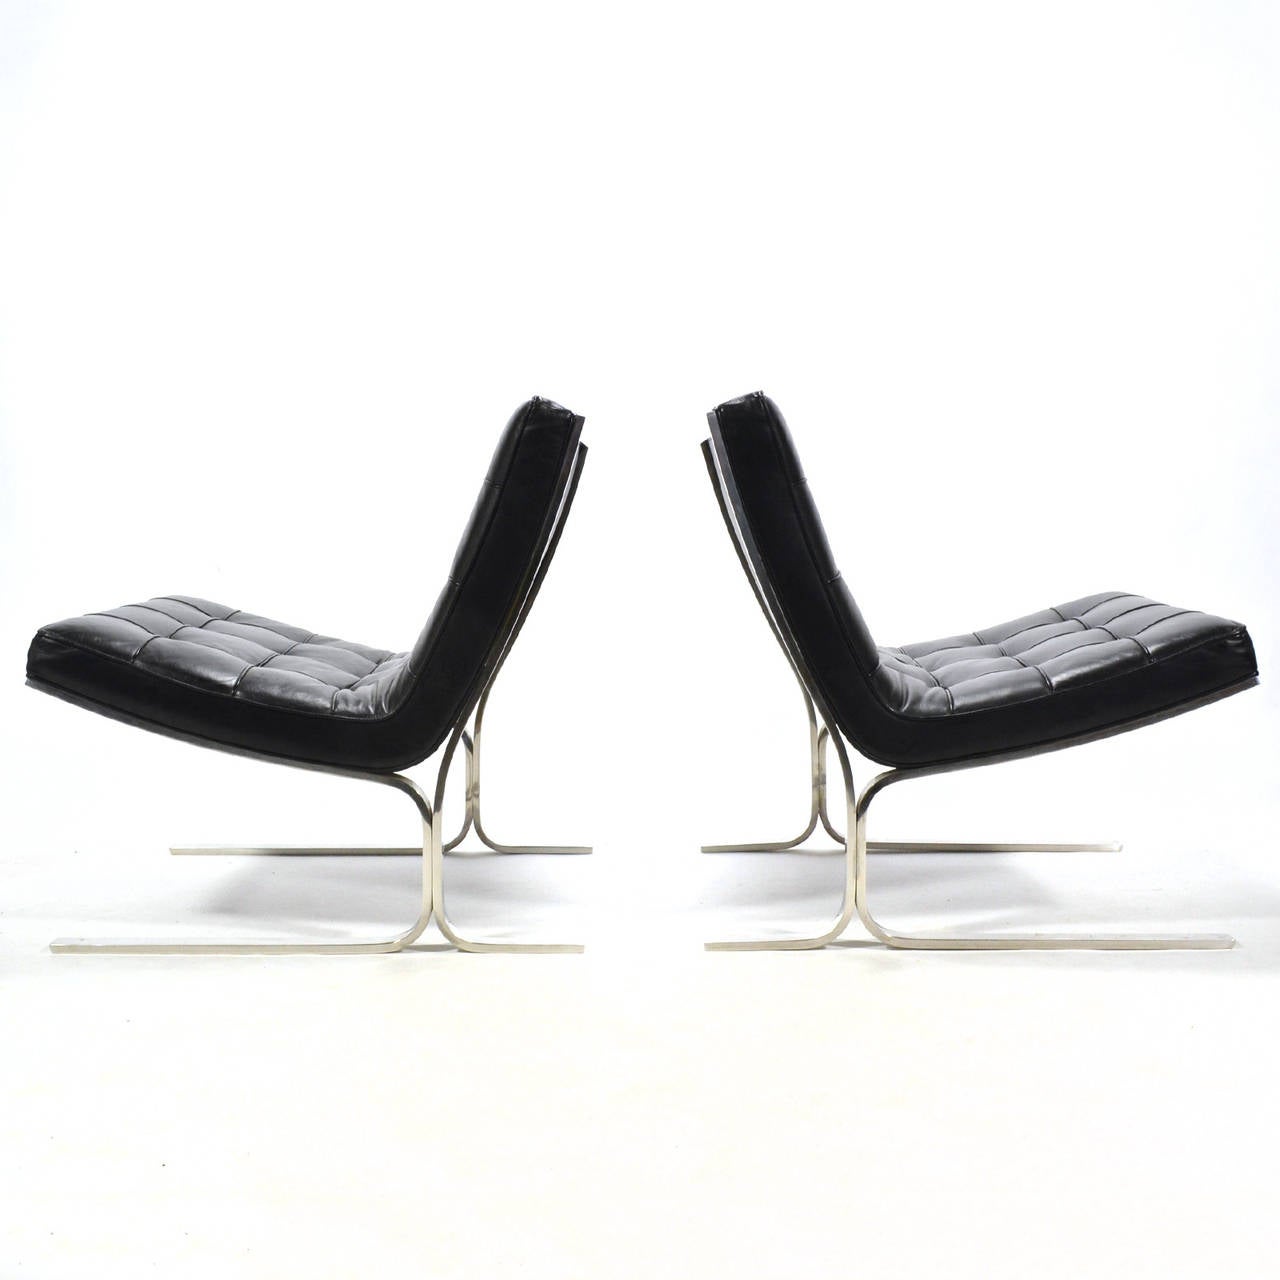 Sublimely beautiful and impeccably constructed, the 28 lounge chair by Nicos Zographos has qualities similar to Mies' Barcelona chair. However without the visible straps supporting loose cushions, it perhaps offers an even more spare, minimal